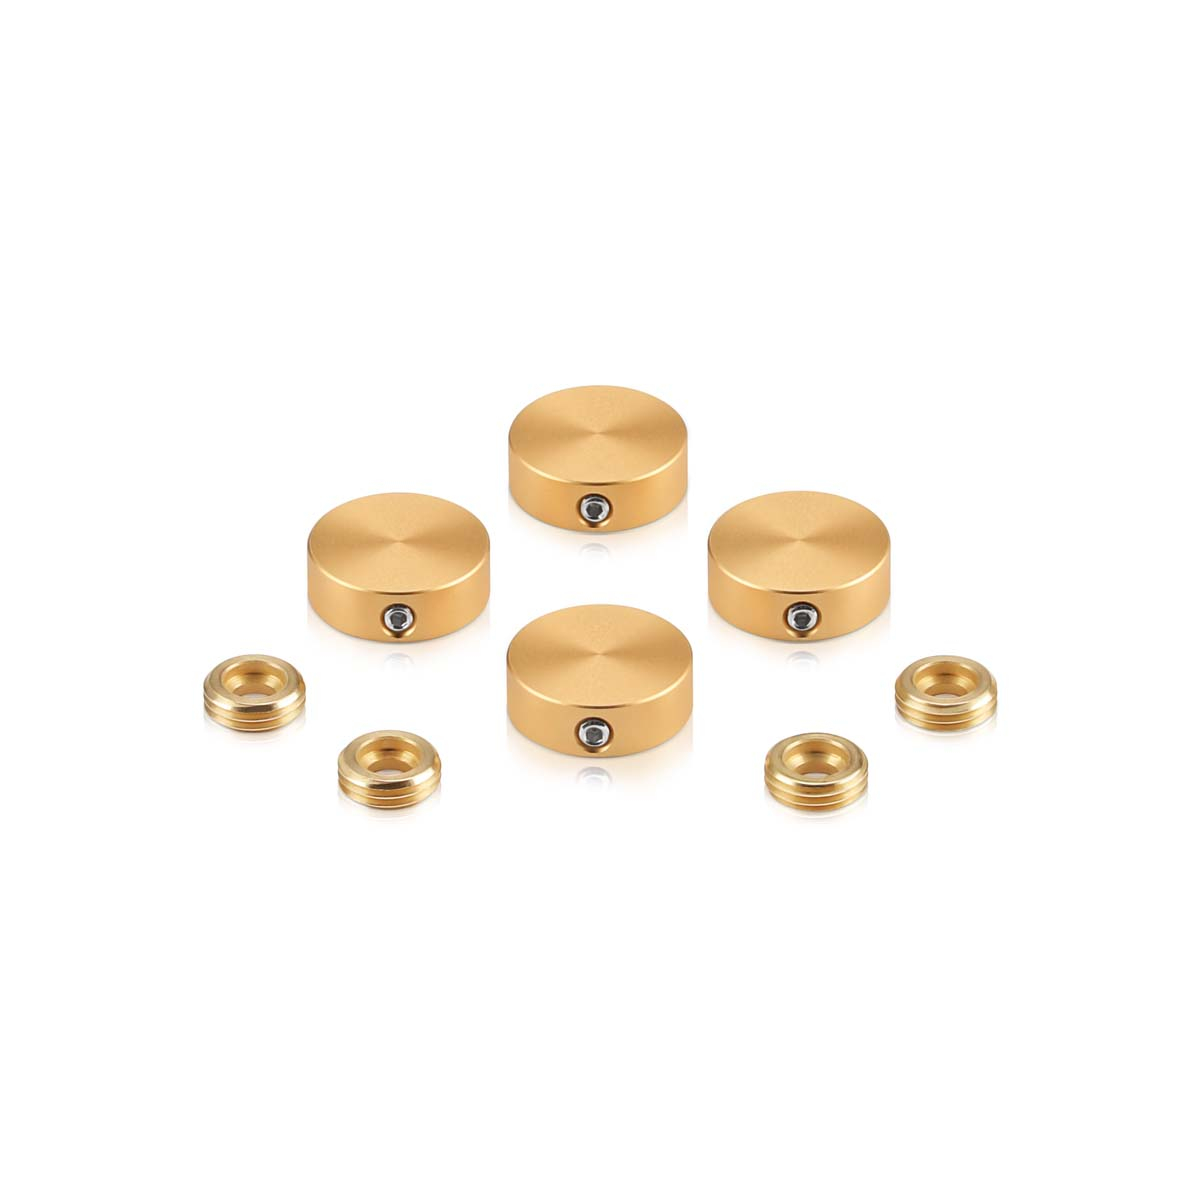 Set of 4 Locking Screw Cover, Diameter: (Less 3/4''), Aluminum Champagne Anodized Finish, (Indoor or Outdoor Use)